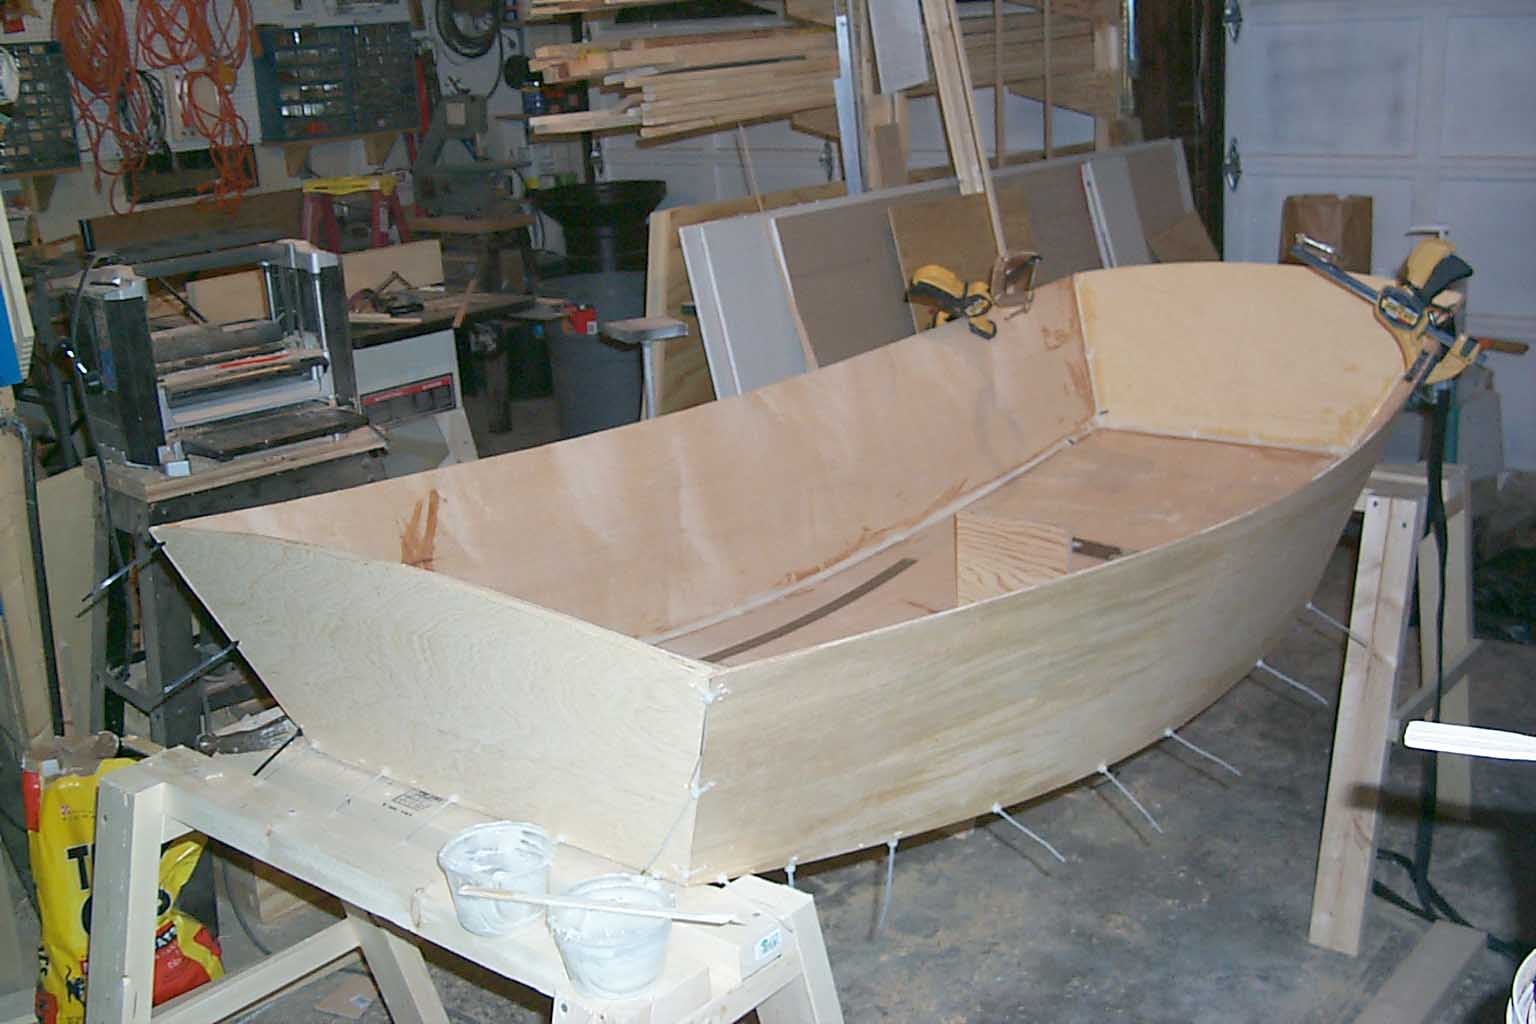 Dinghy Building | How To and DIY Building Plans Online Class - Boat